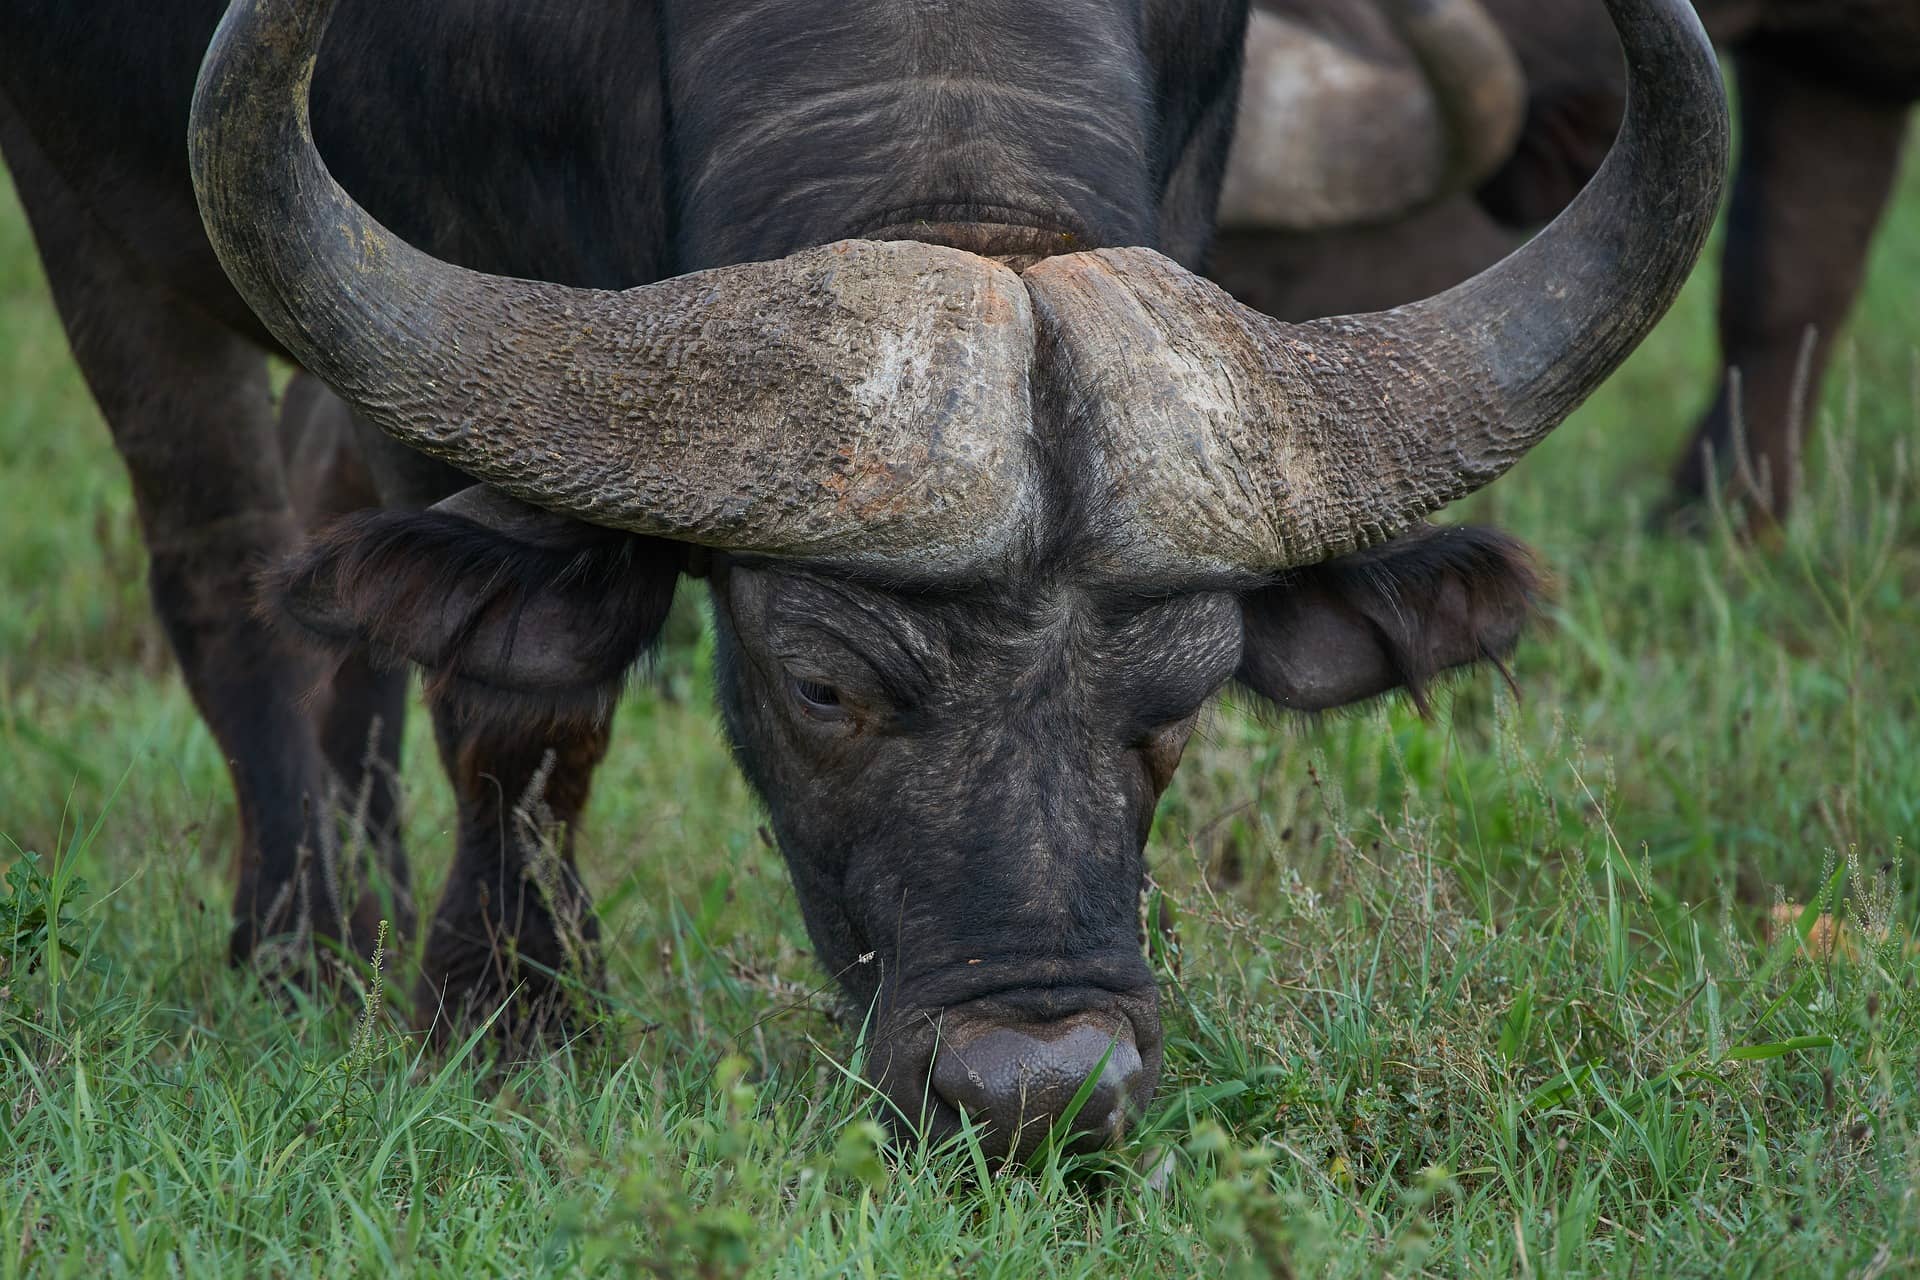 Unusual African buffalo facts and photos - why so feared by hunters?